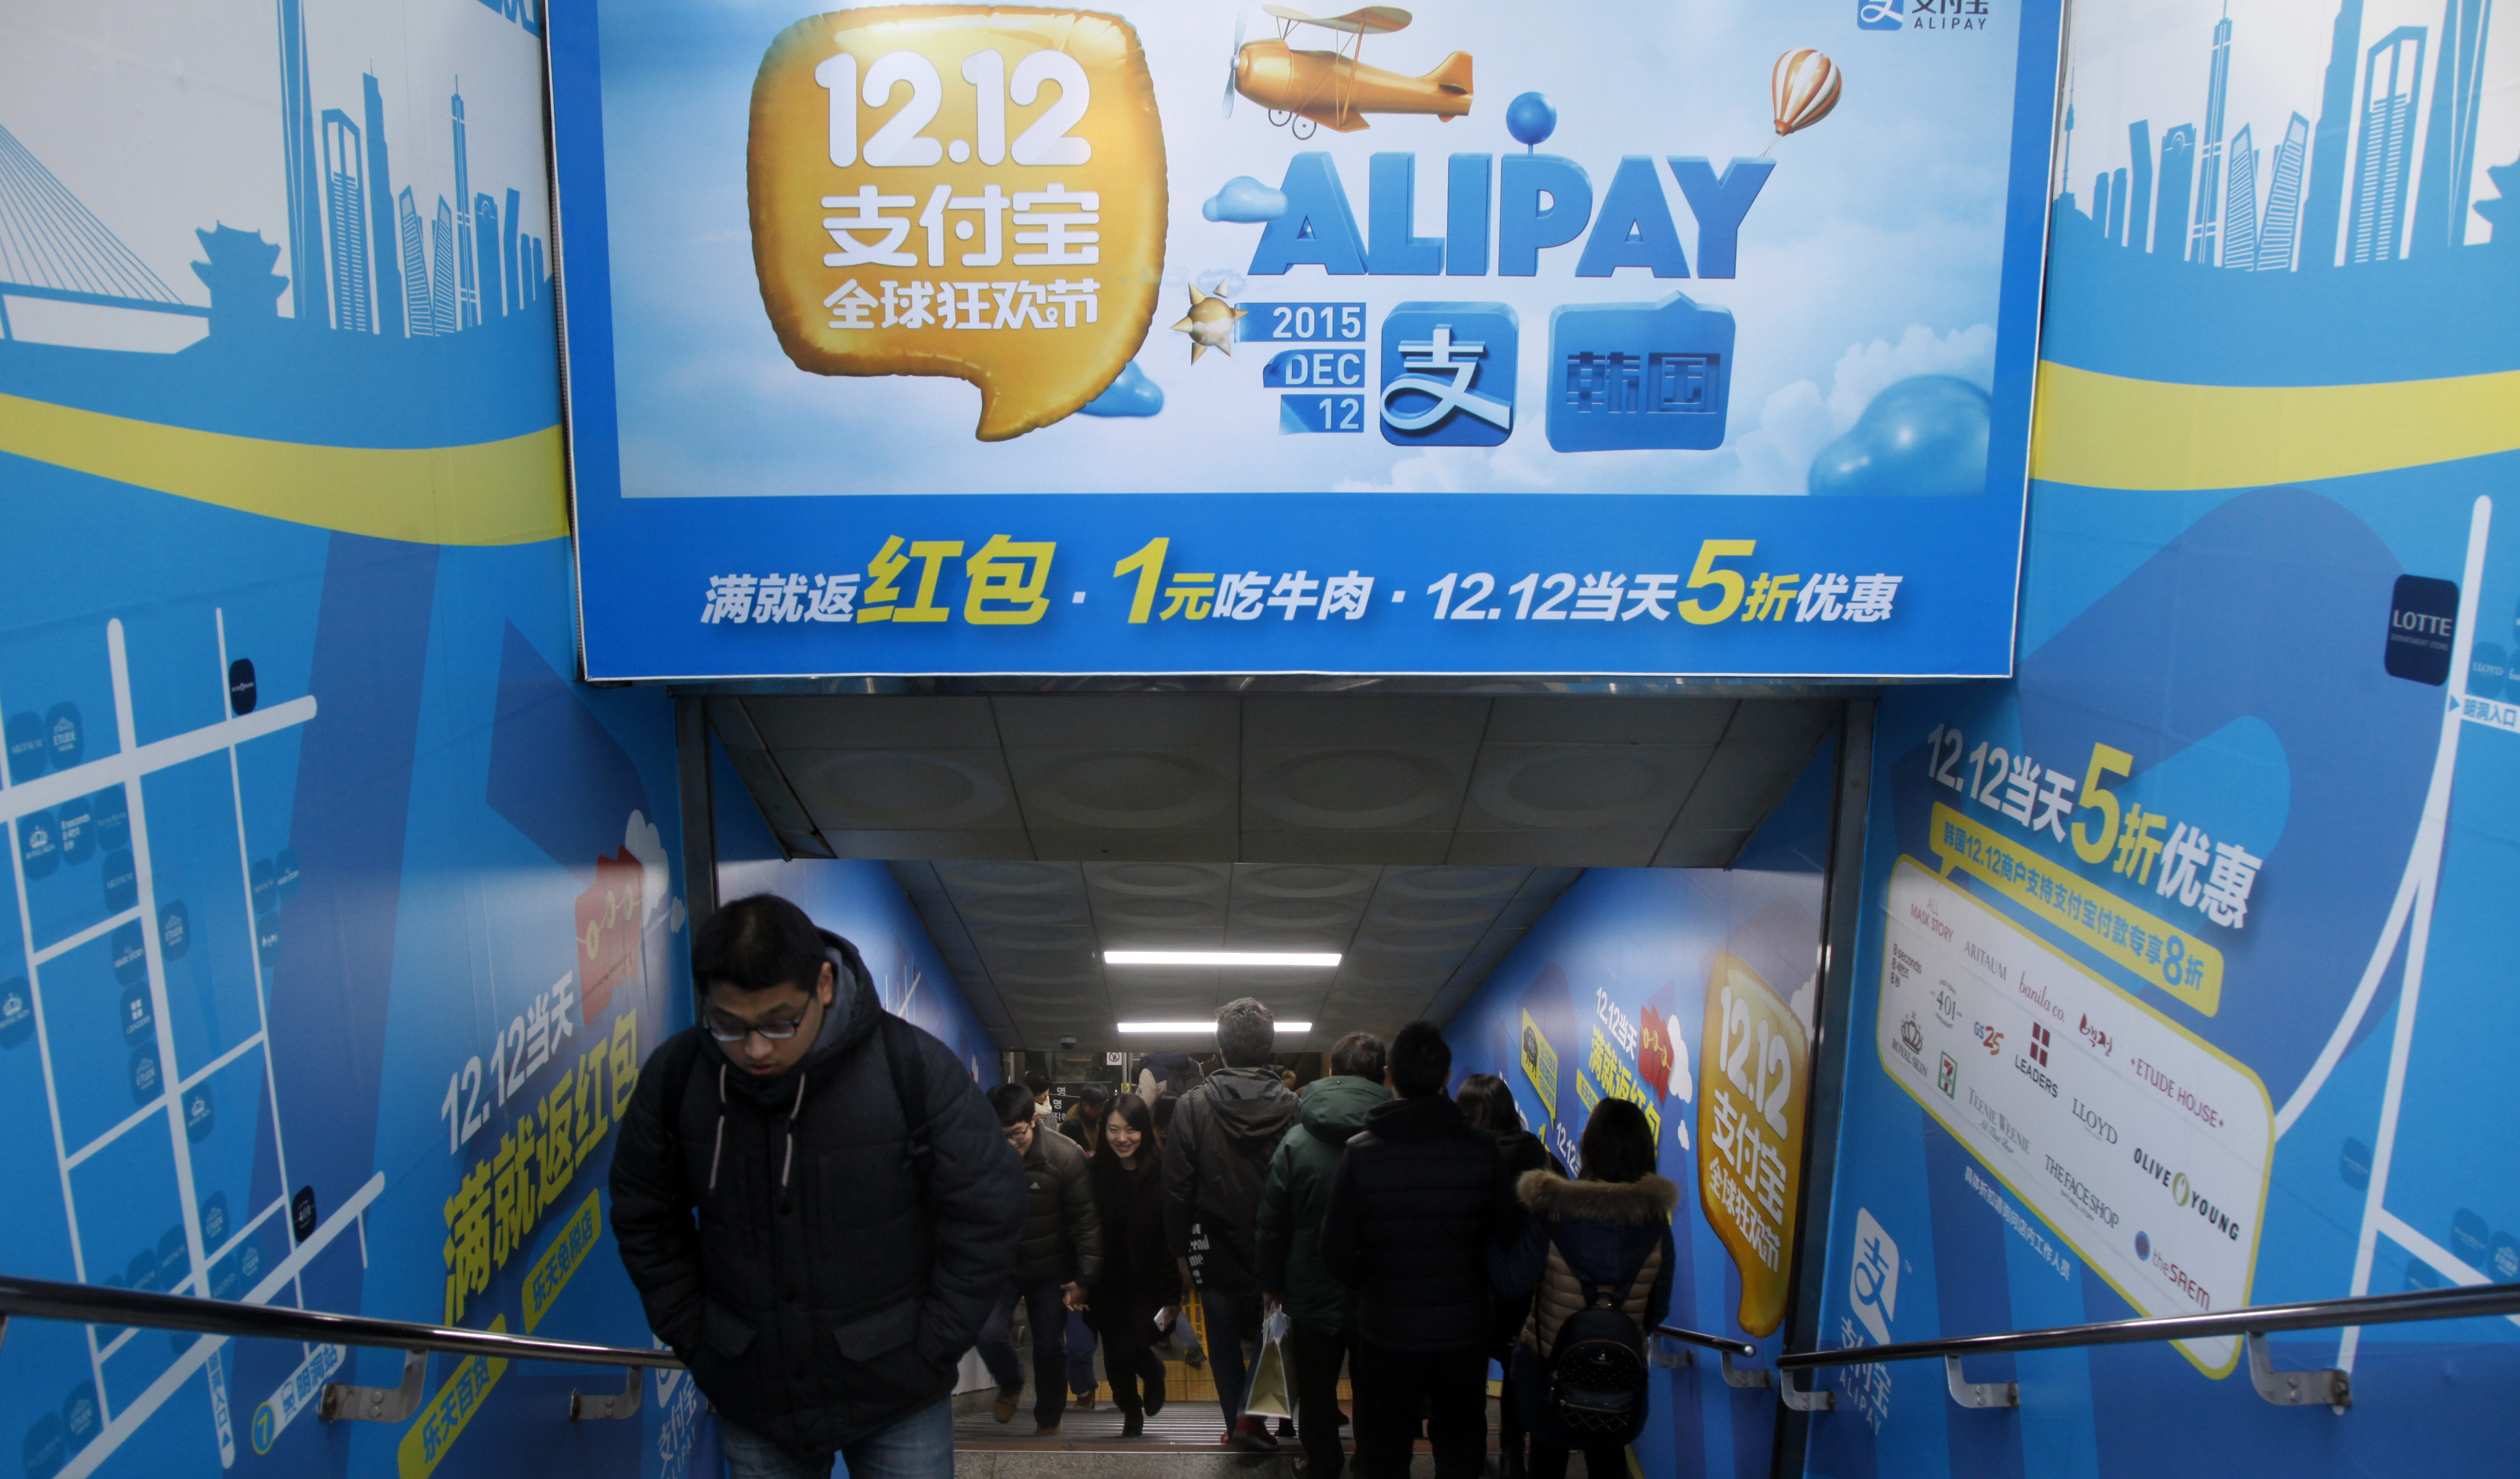 (151220) -- SEOUL, Dec. 20, 2015 (Xinhua) -- Photo taken on Dec. 19, 2015 shows an advertisement of Alipay in Seoul, the Republic of Korea (ROK). China's free trade agreement (FTA) with the ROK took effect on Dec. 20, 2015. Under the deal, Seoul and Beijing will eliminate tariffs on more than 90 percent of traded goods within 20 years. (Xinhua/Yao Qilin) (djj)